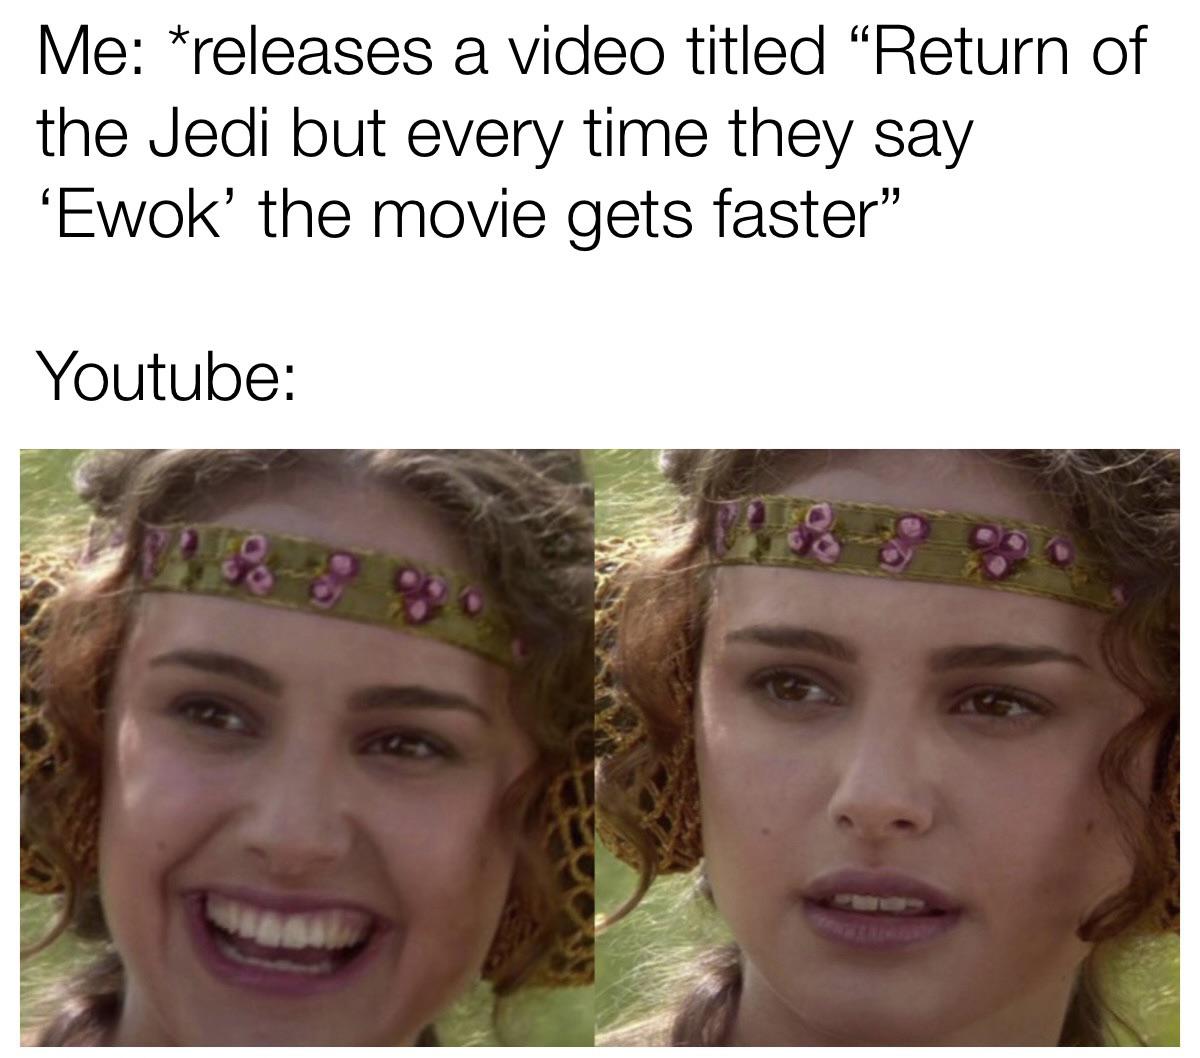 funny pics and memes - head - Me releases a video titled "Return of the Jedi but every time they say 'Ewok' the movie gets faster" Youtube